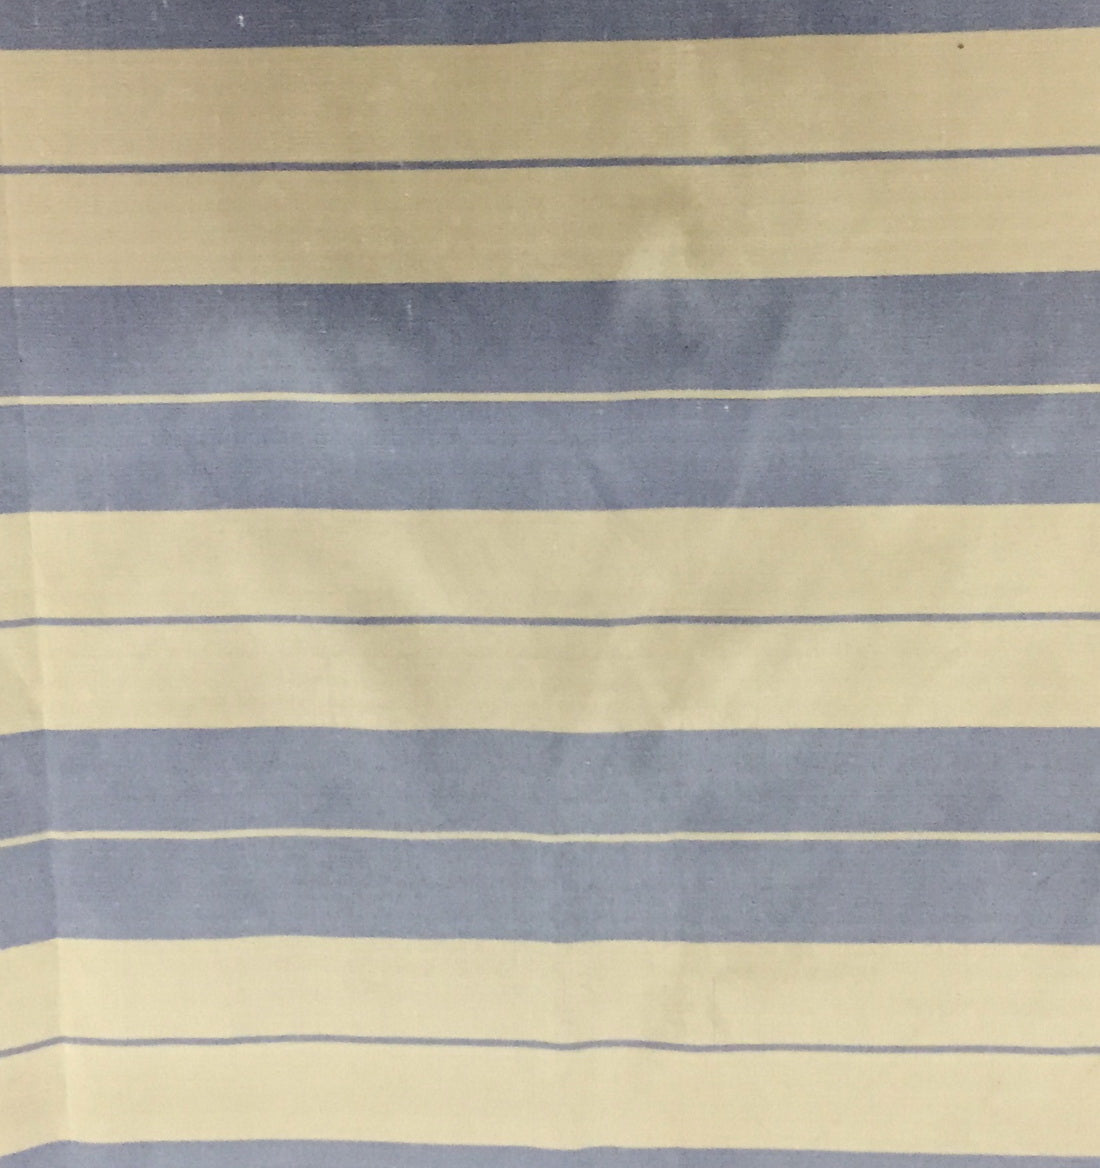 100% Pure Silk dupion cloudy blue and beige stripe Fabric 54&quot; wide by the yard